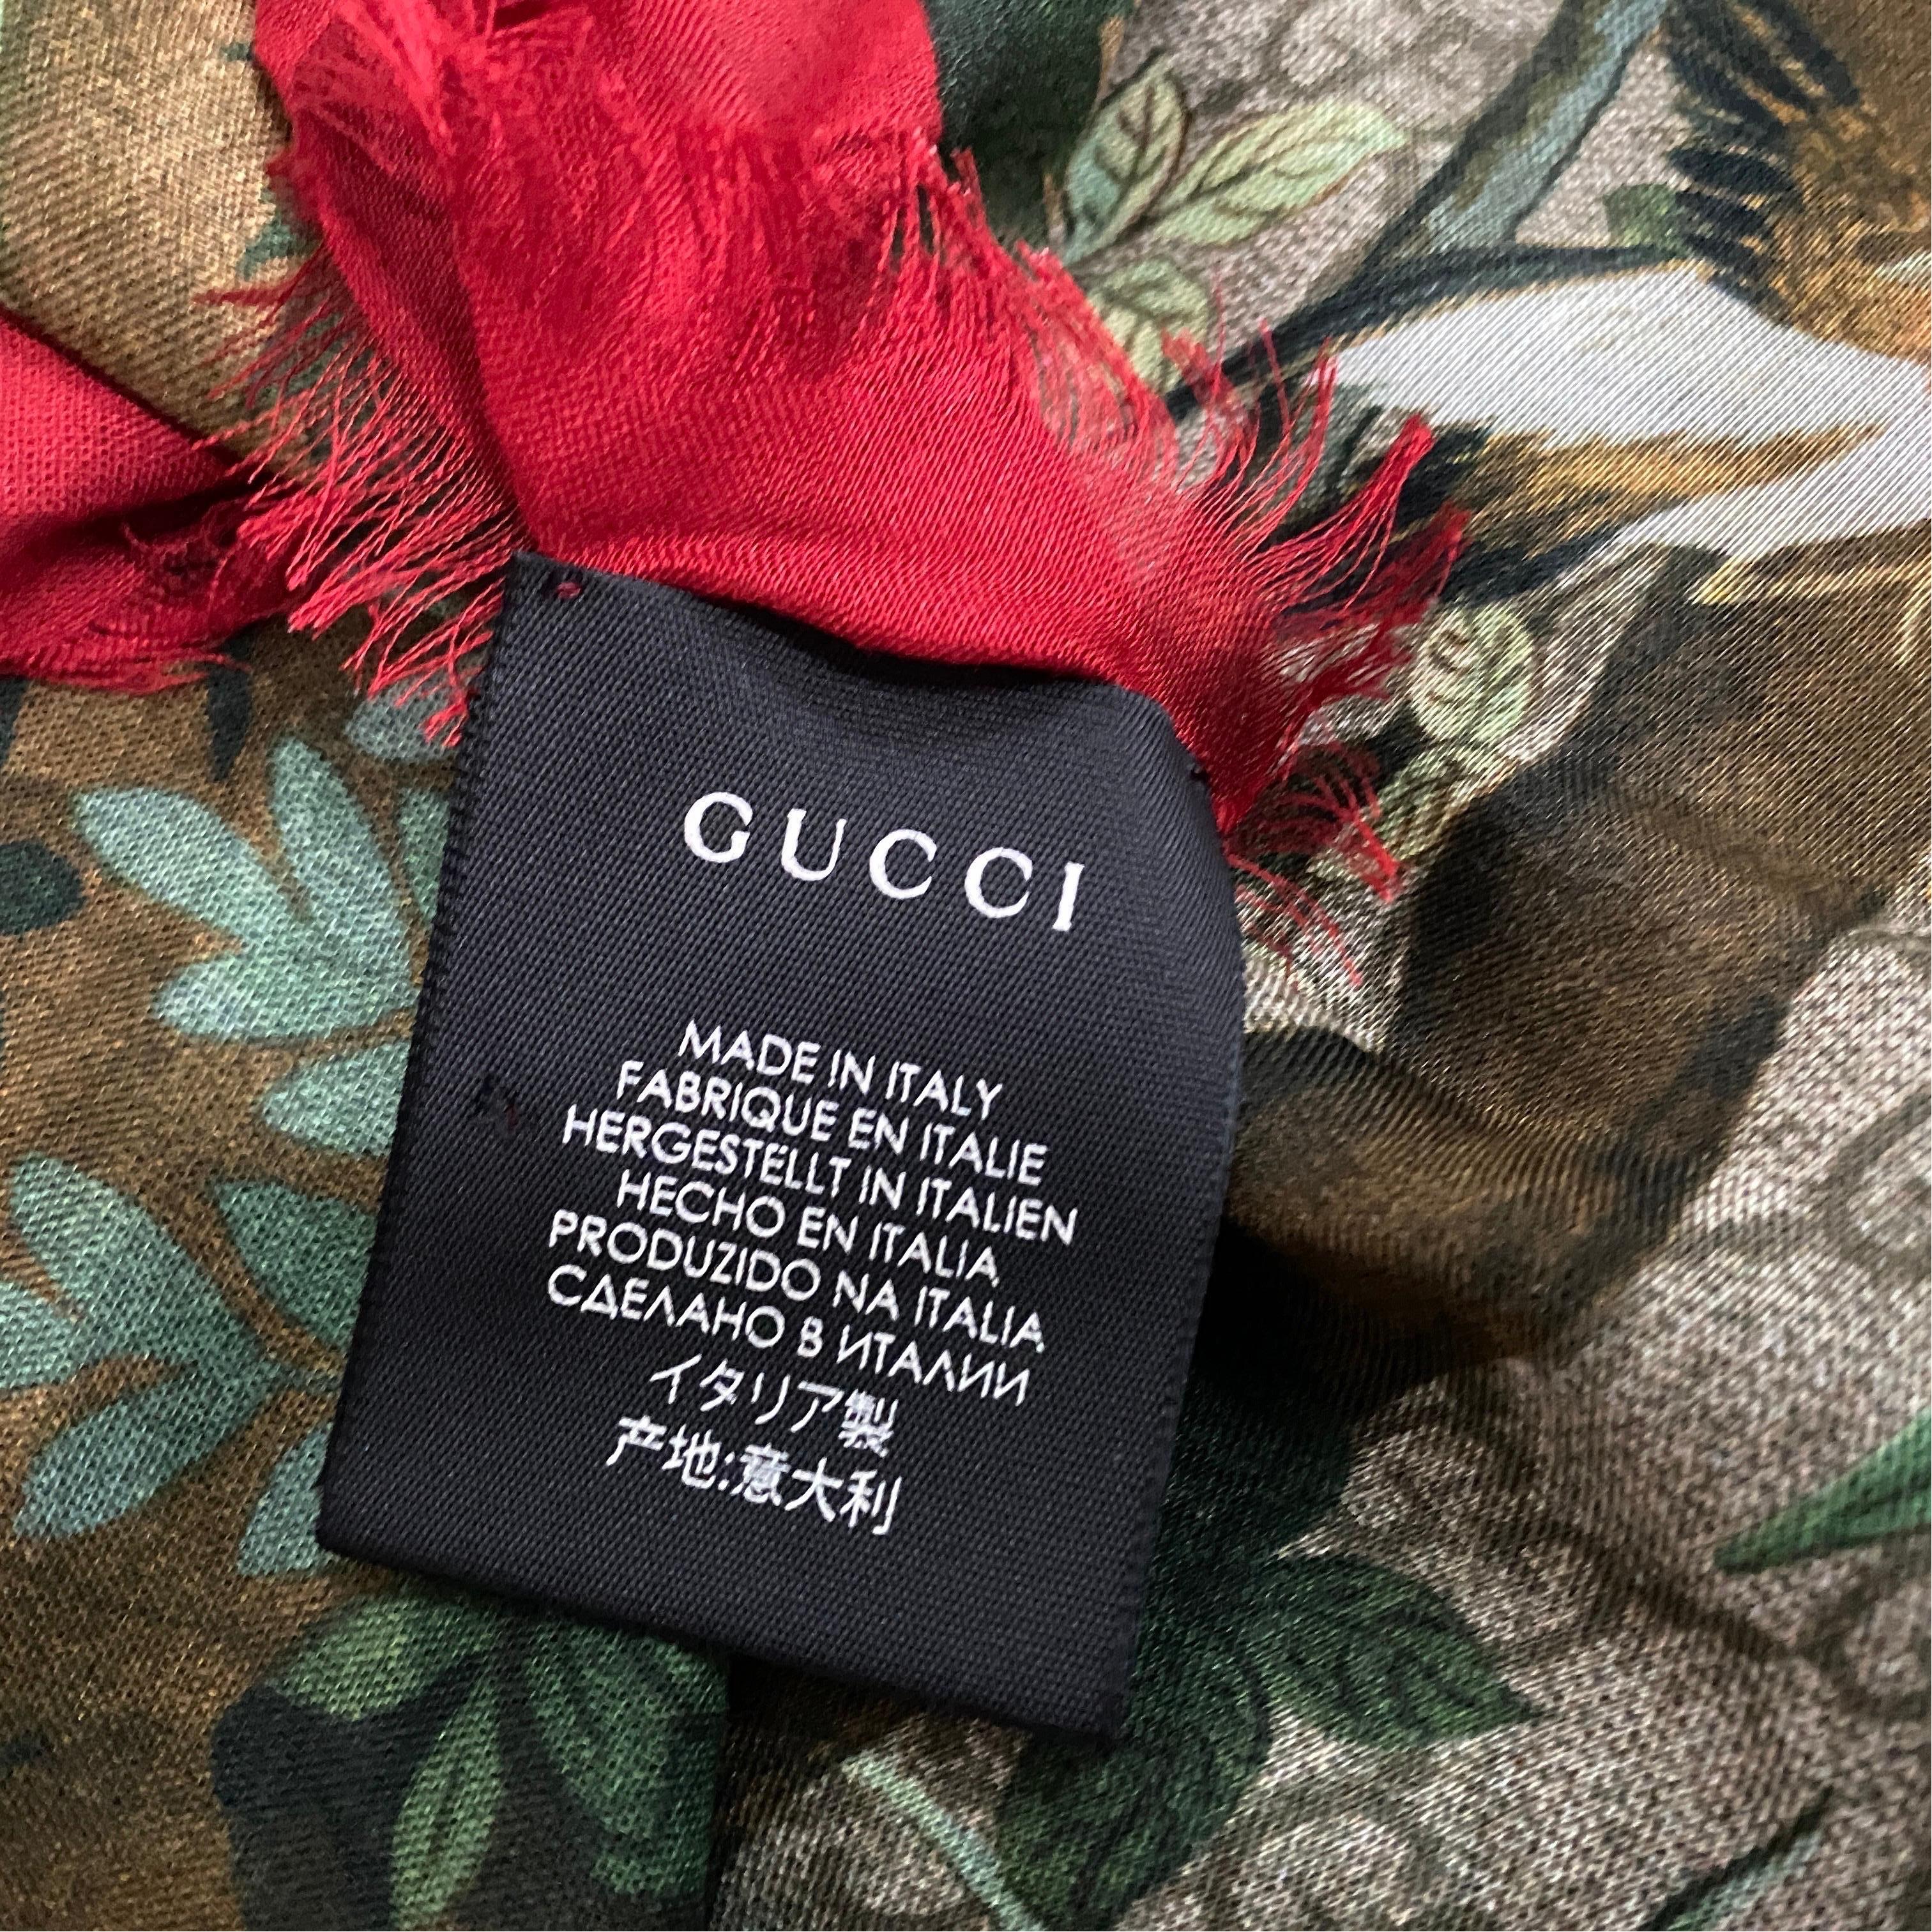 An Iconic Wool and Silk Flora and Fauna Italian Scarf by Gucci 2